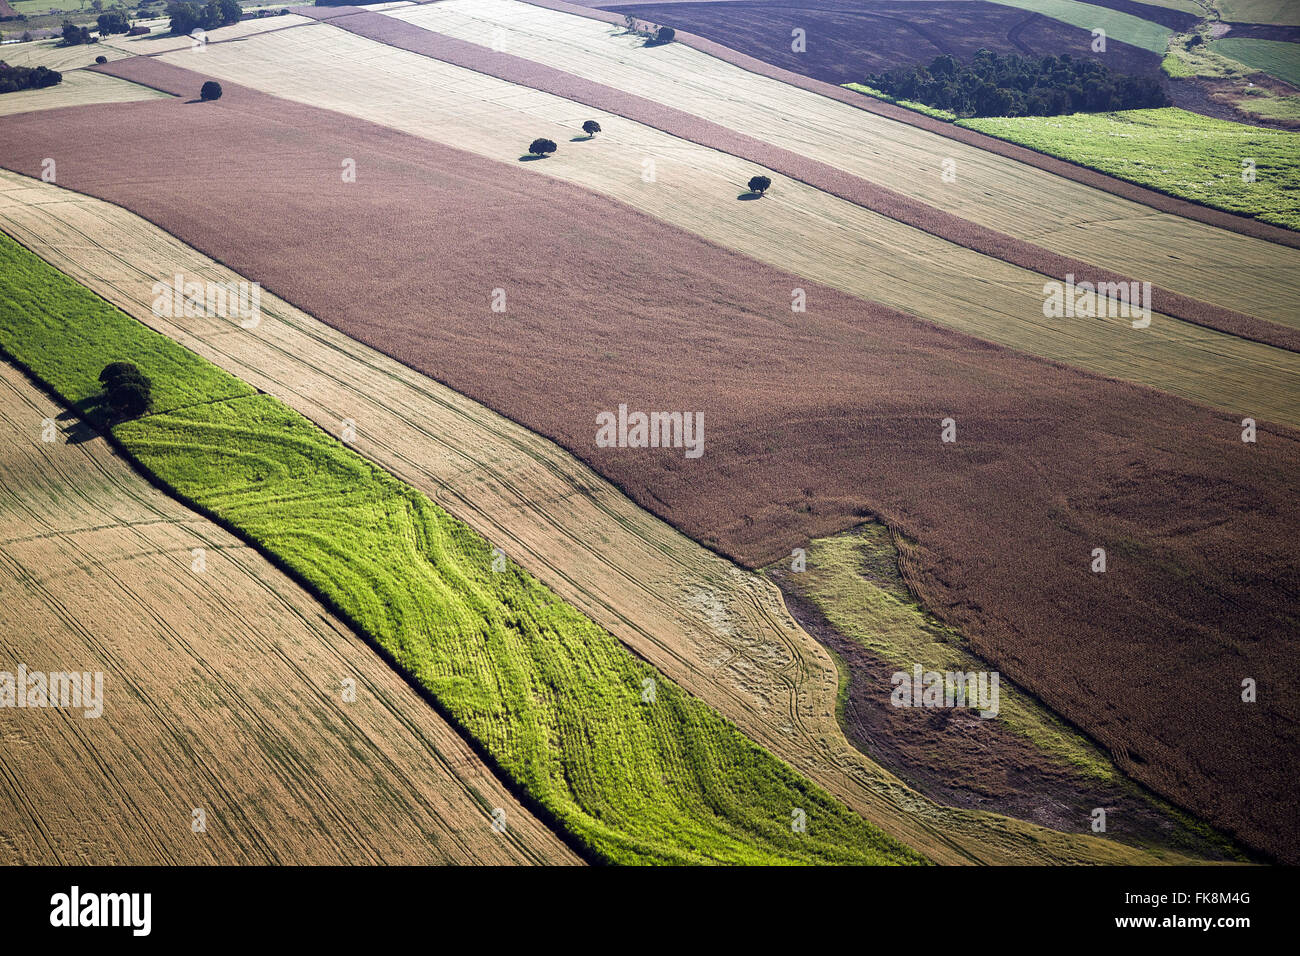 Aerial view of plantations of wheat, sugar cane, corn and banana in the countryside Stock Photo